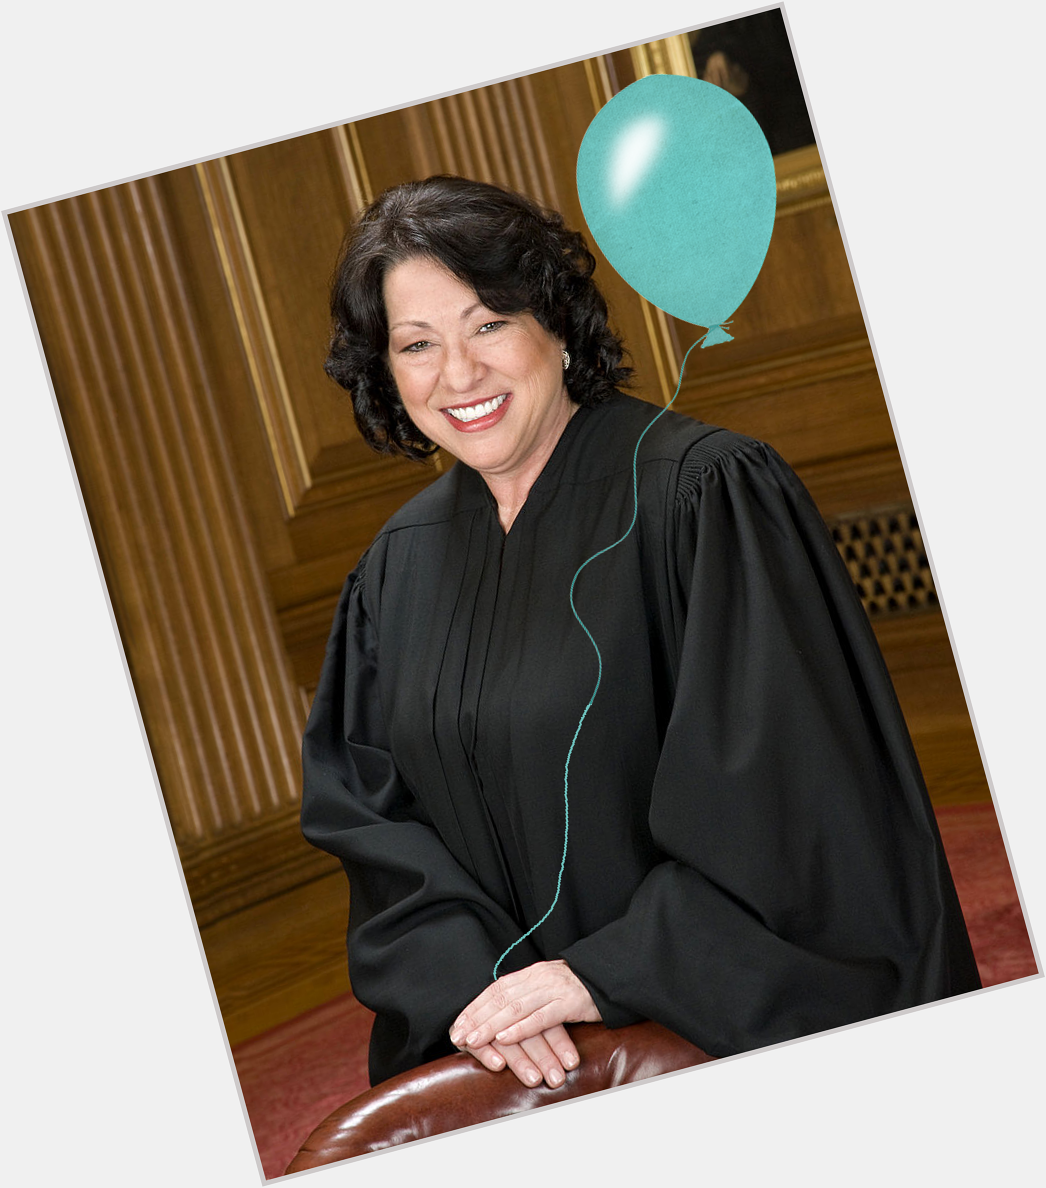 Happy birthday to the first Latina Justice of the Supreme Court, Sonia Sotomayor! 